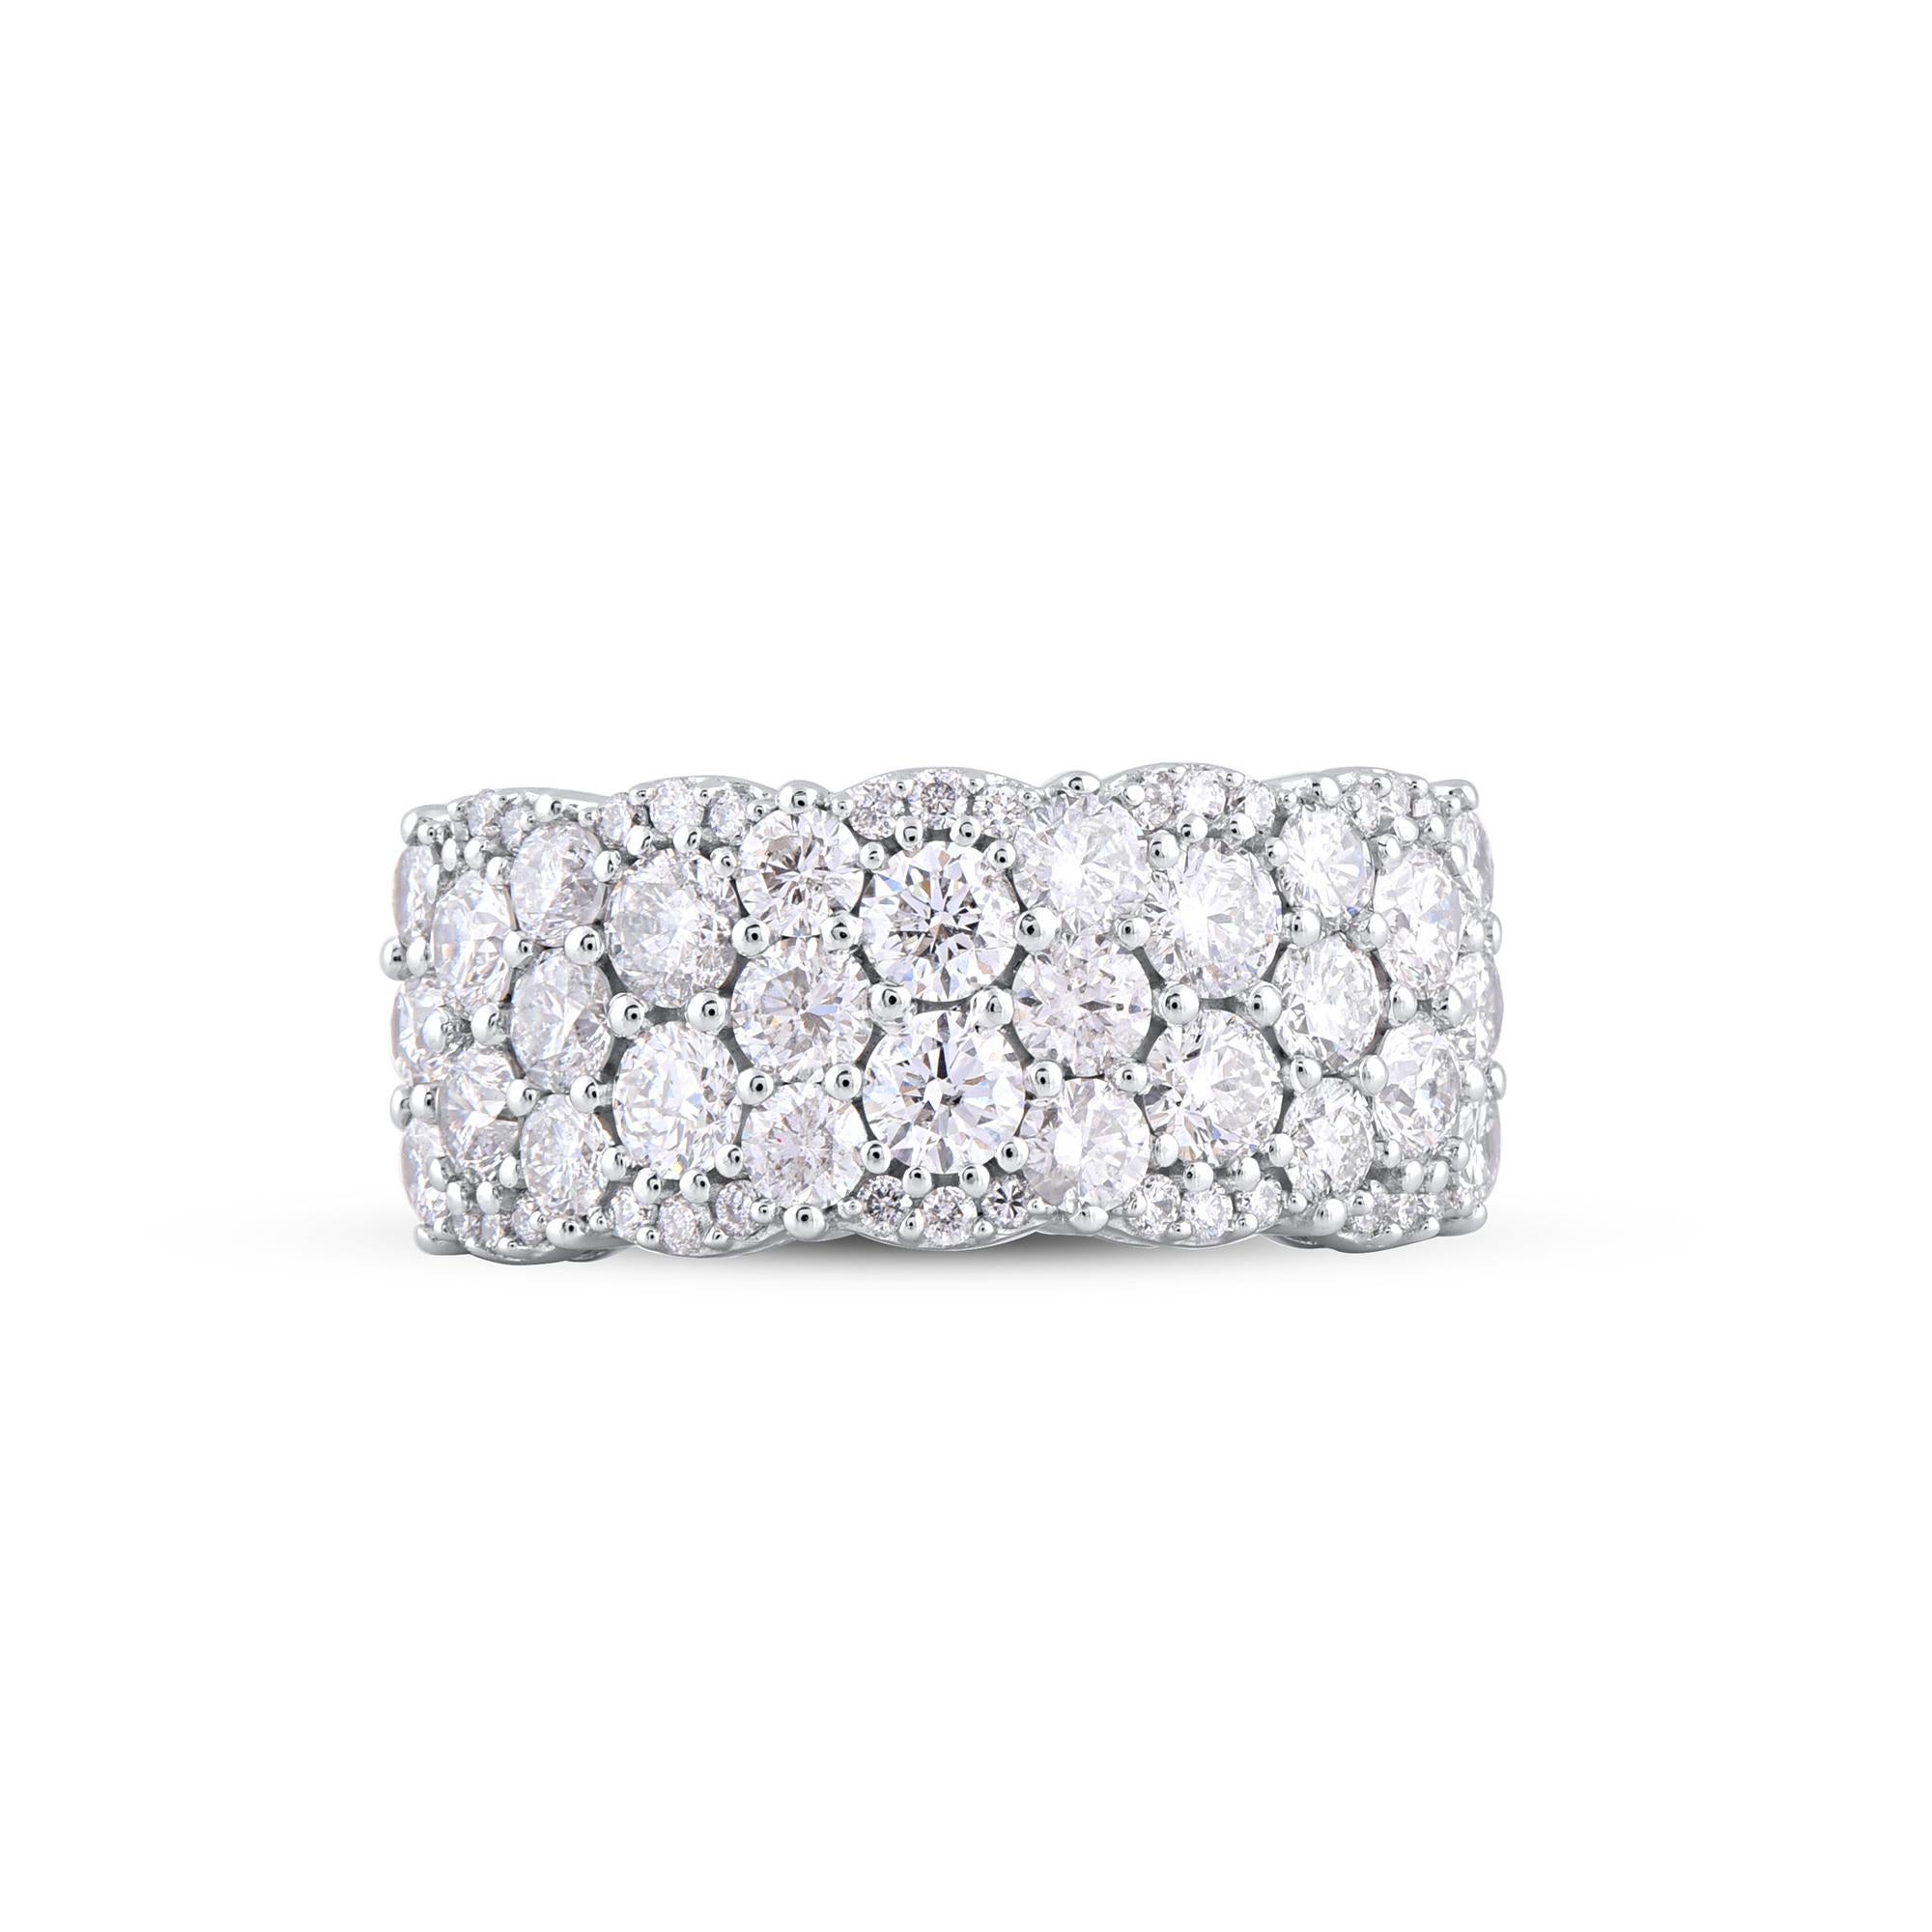 Make your most special and precious day shine with this wedding band ring. Beautifully crafted by our inhouse experts in 14 karat white gold and embellished with 58 brilliant cut round diamond set in prong setting. Total diamond weight is 3.0 carat.